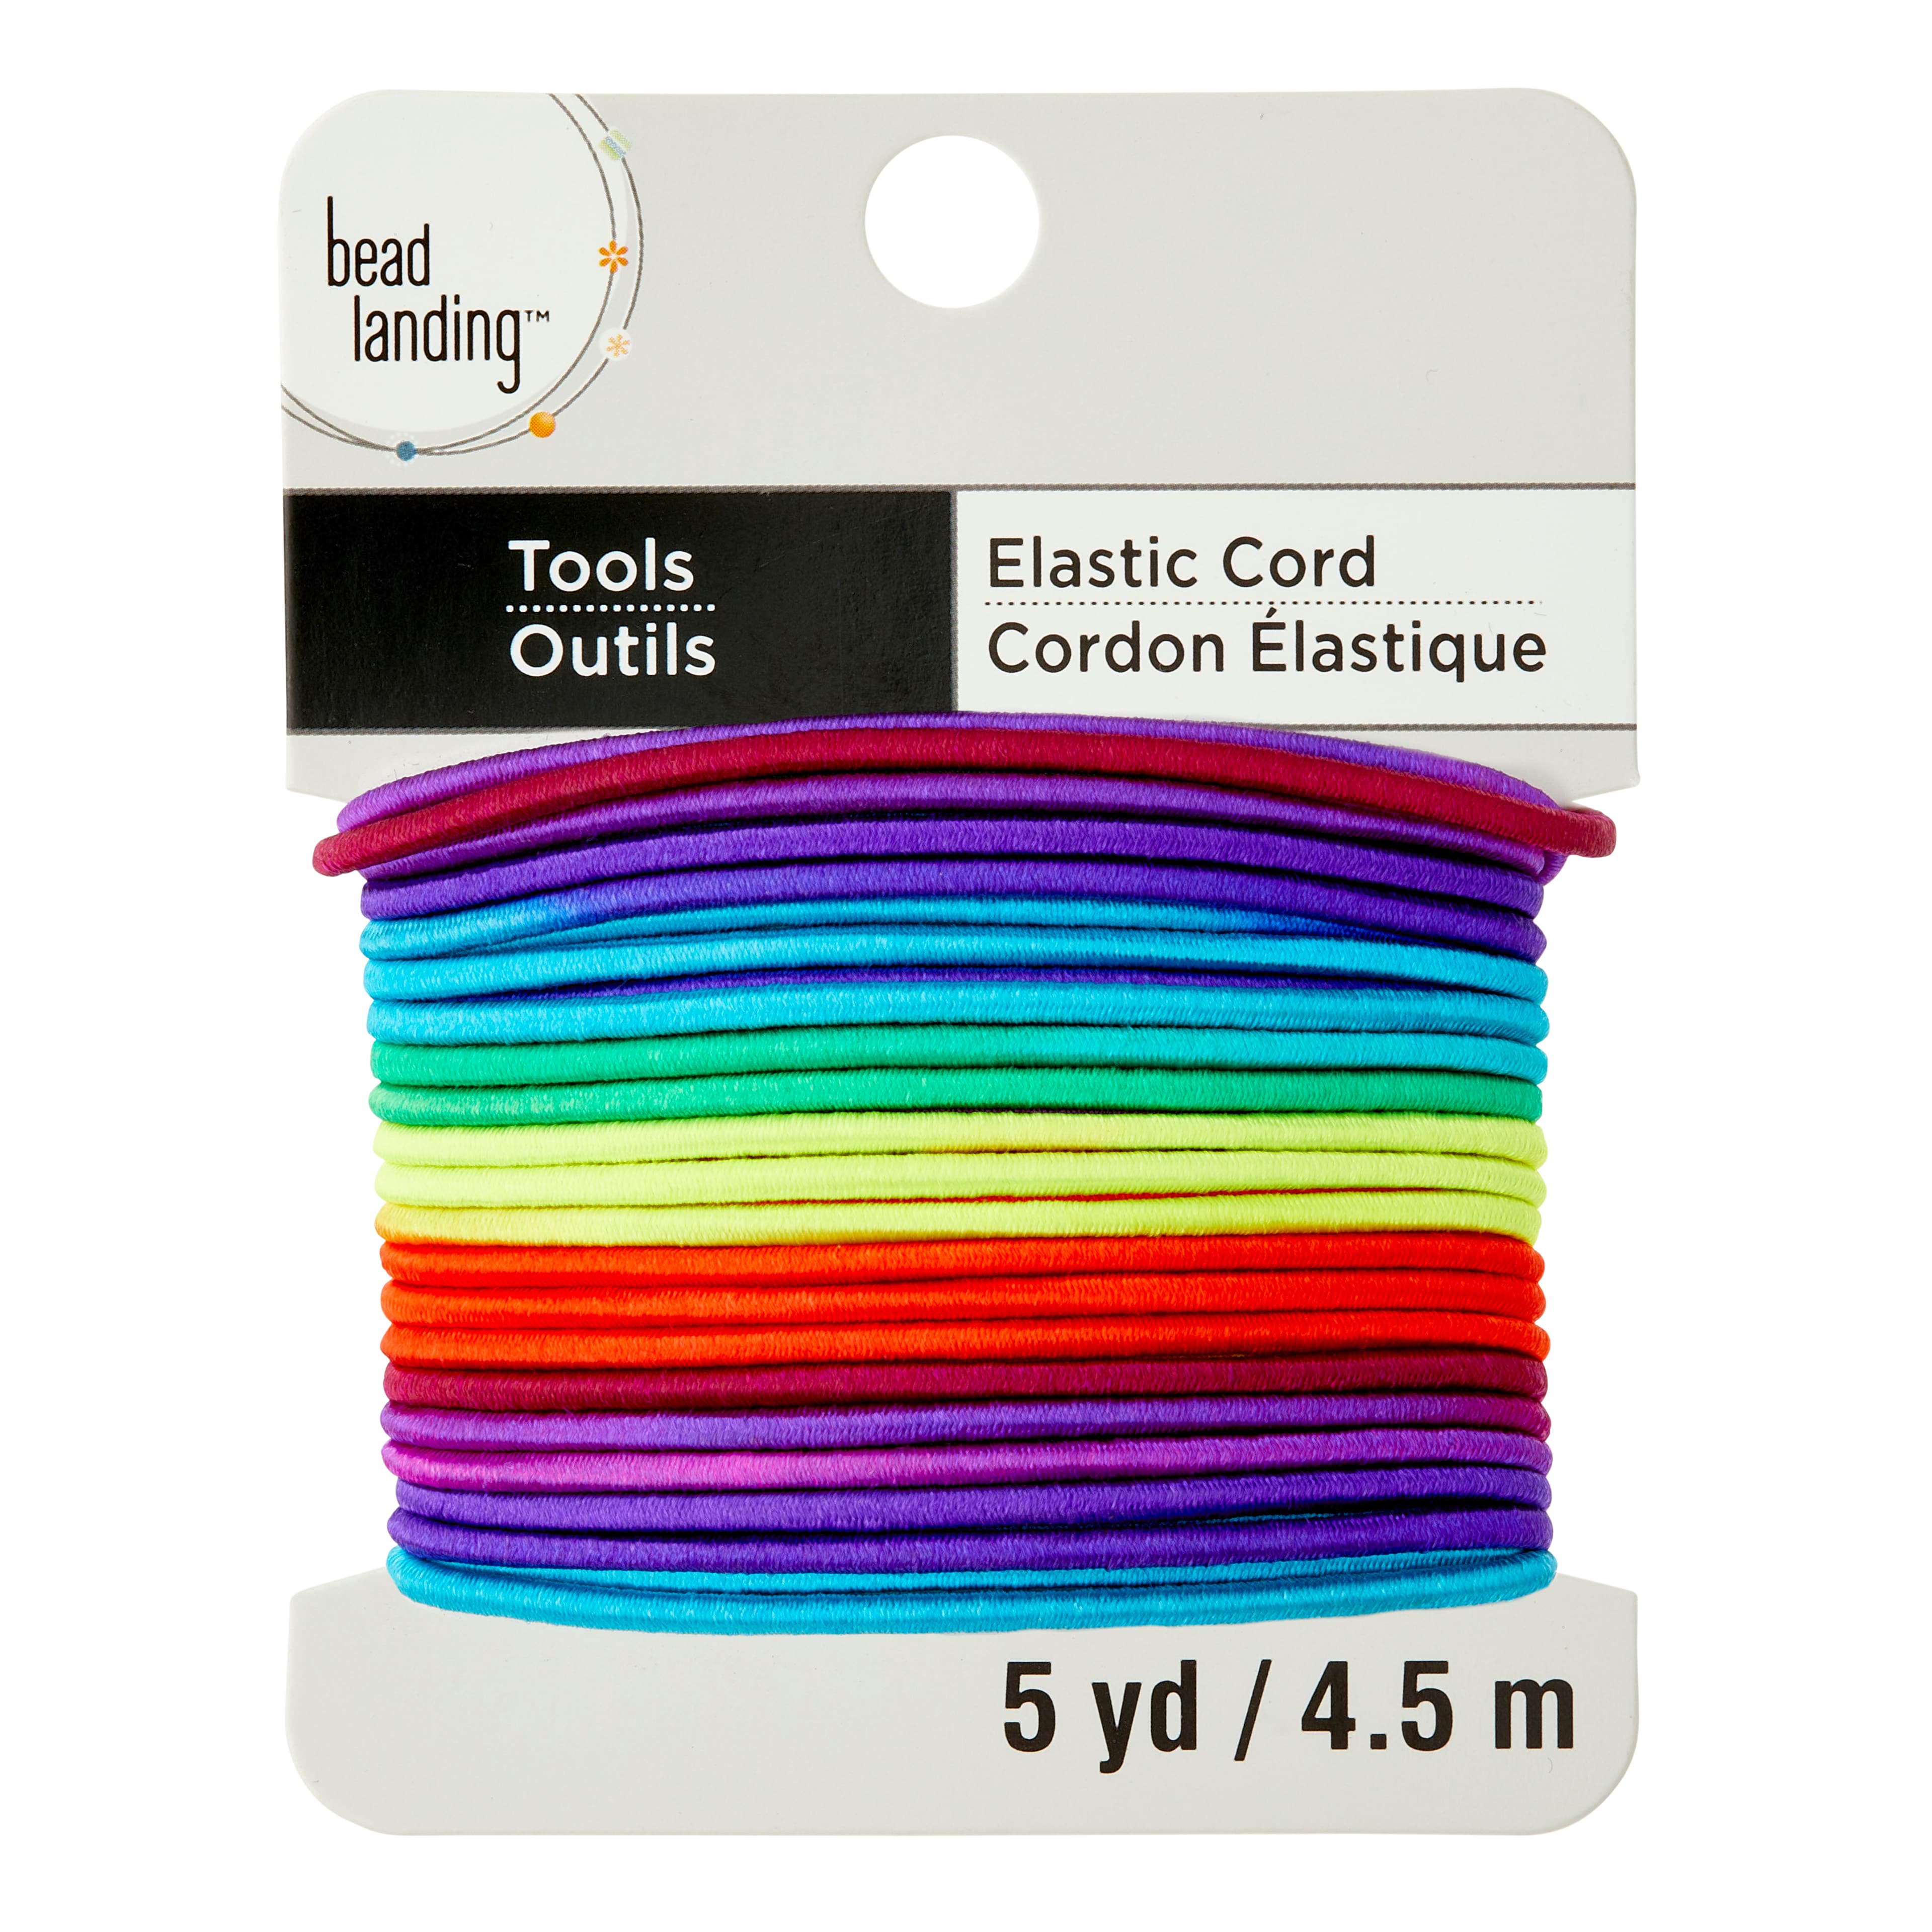 12 Packs: 1mm Metallic Round Leather Cording Pack by Bead Landing™